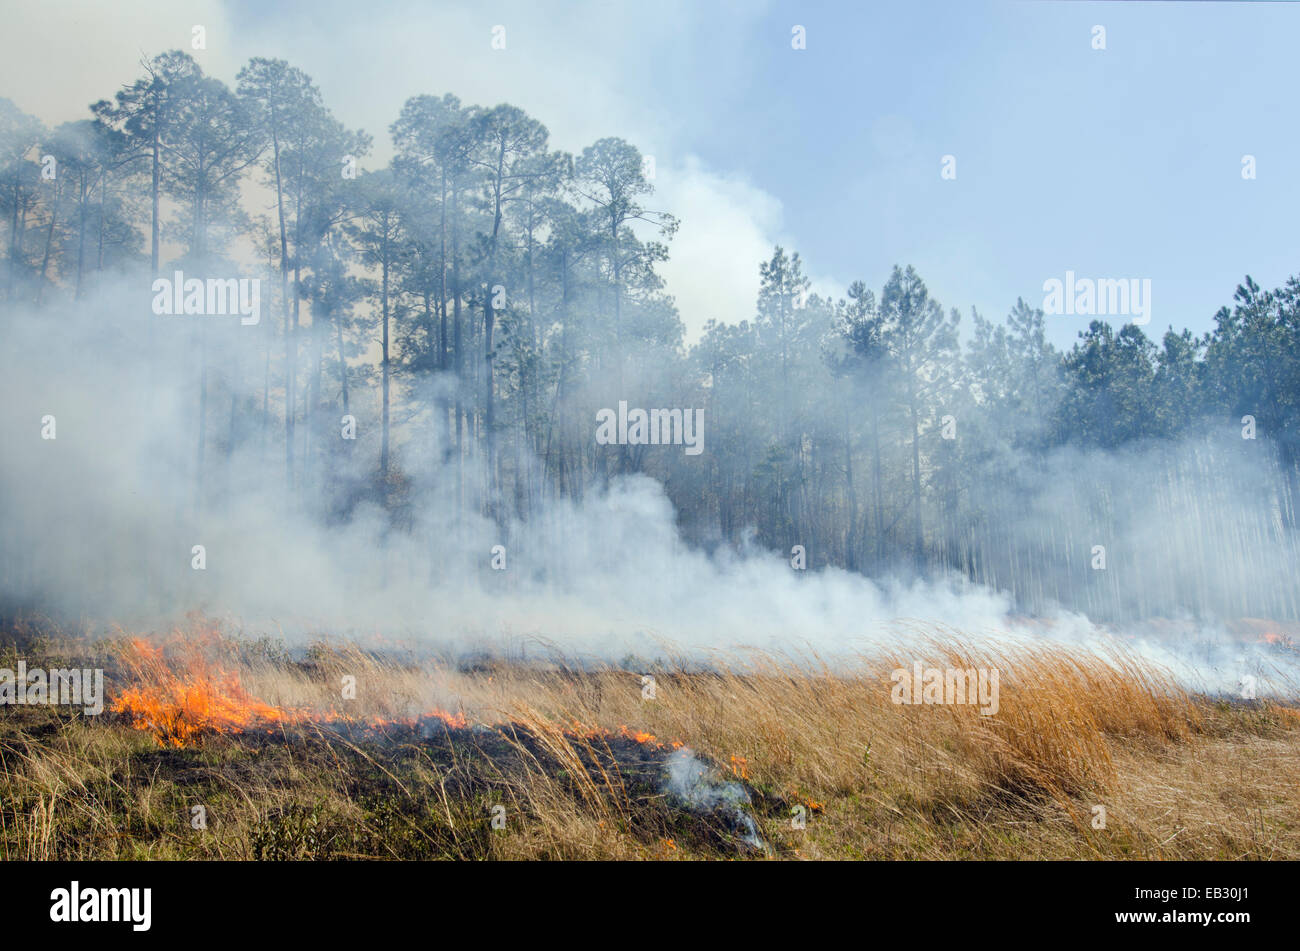 A prescribed burn in Moody Forest Natural Area managed by The Nature Conservancy. Stock Photo